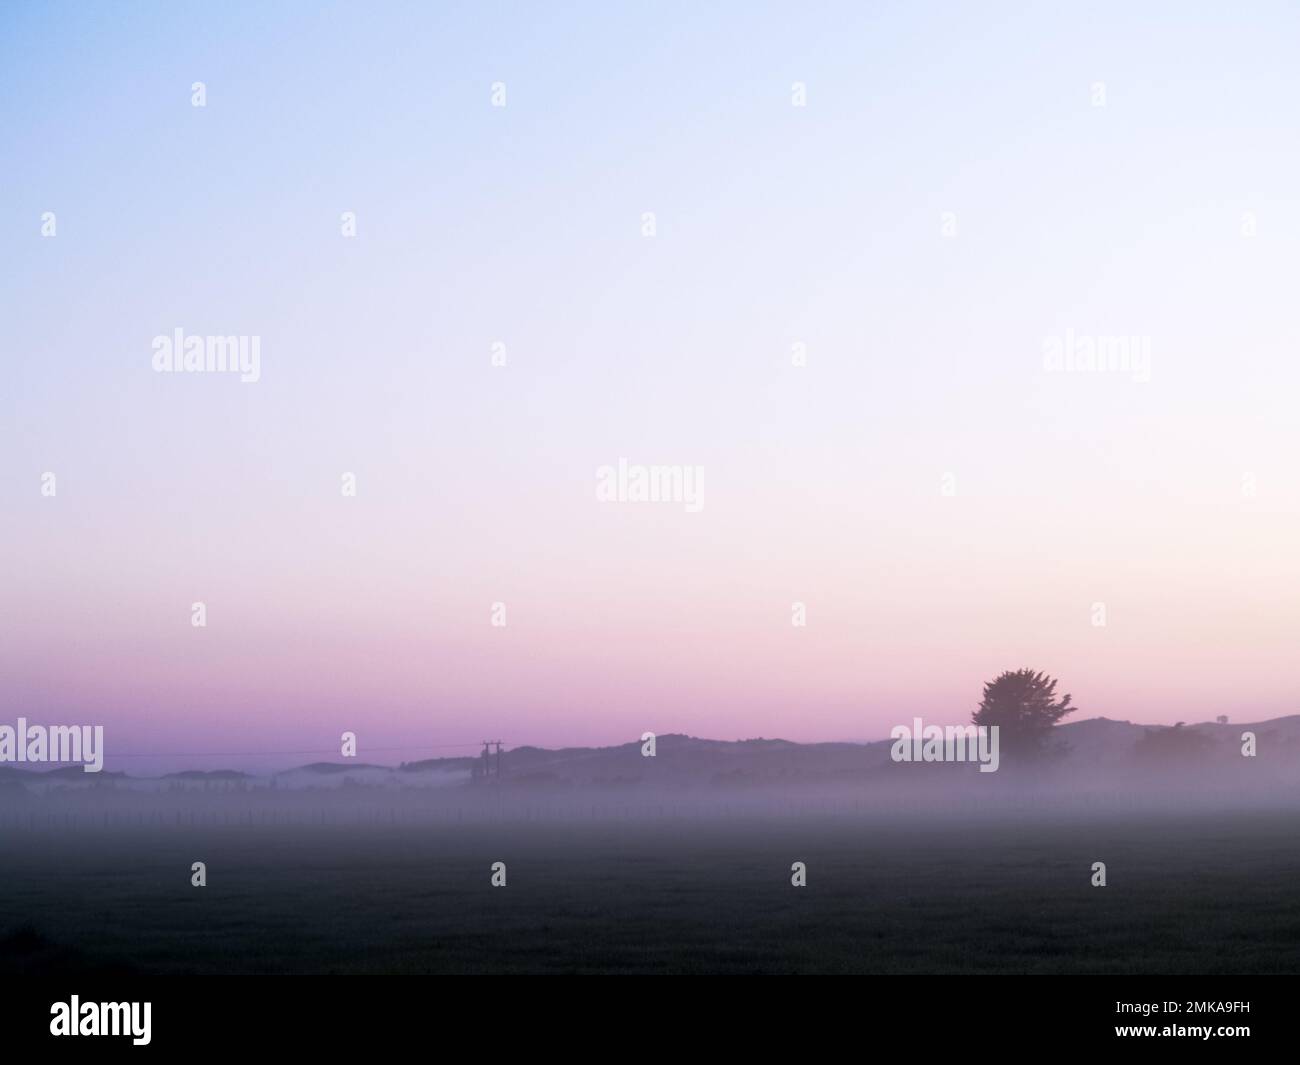 Misty morning across rural land in Wairarapa district, New Zealand. Stock Photo